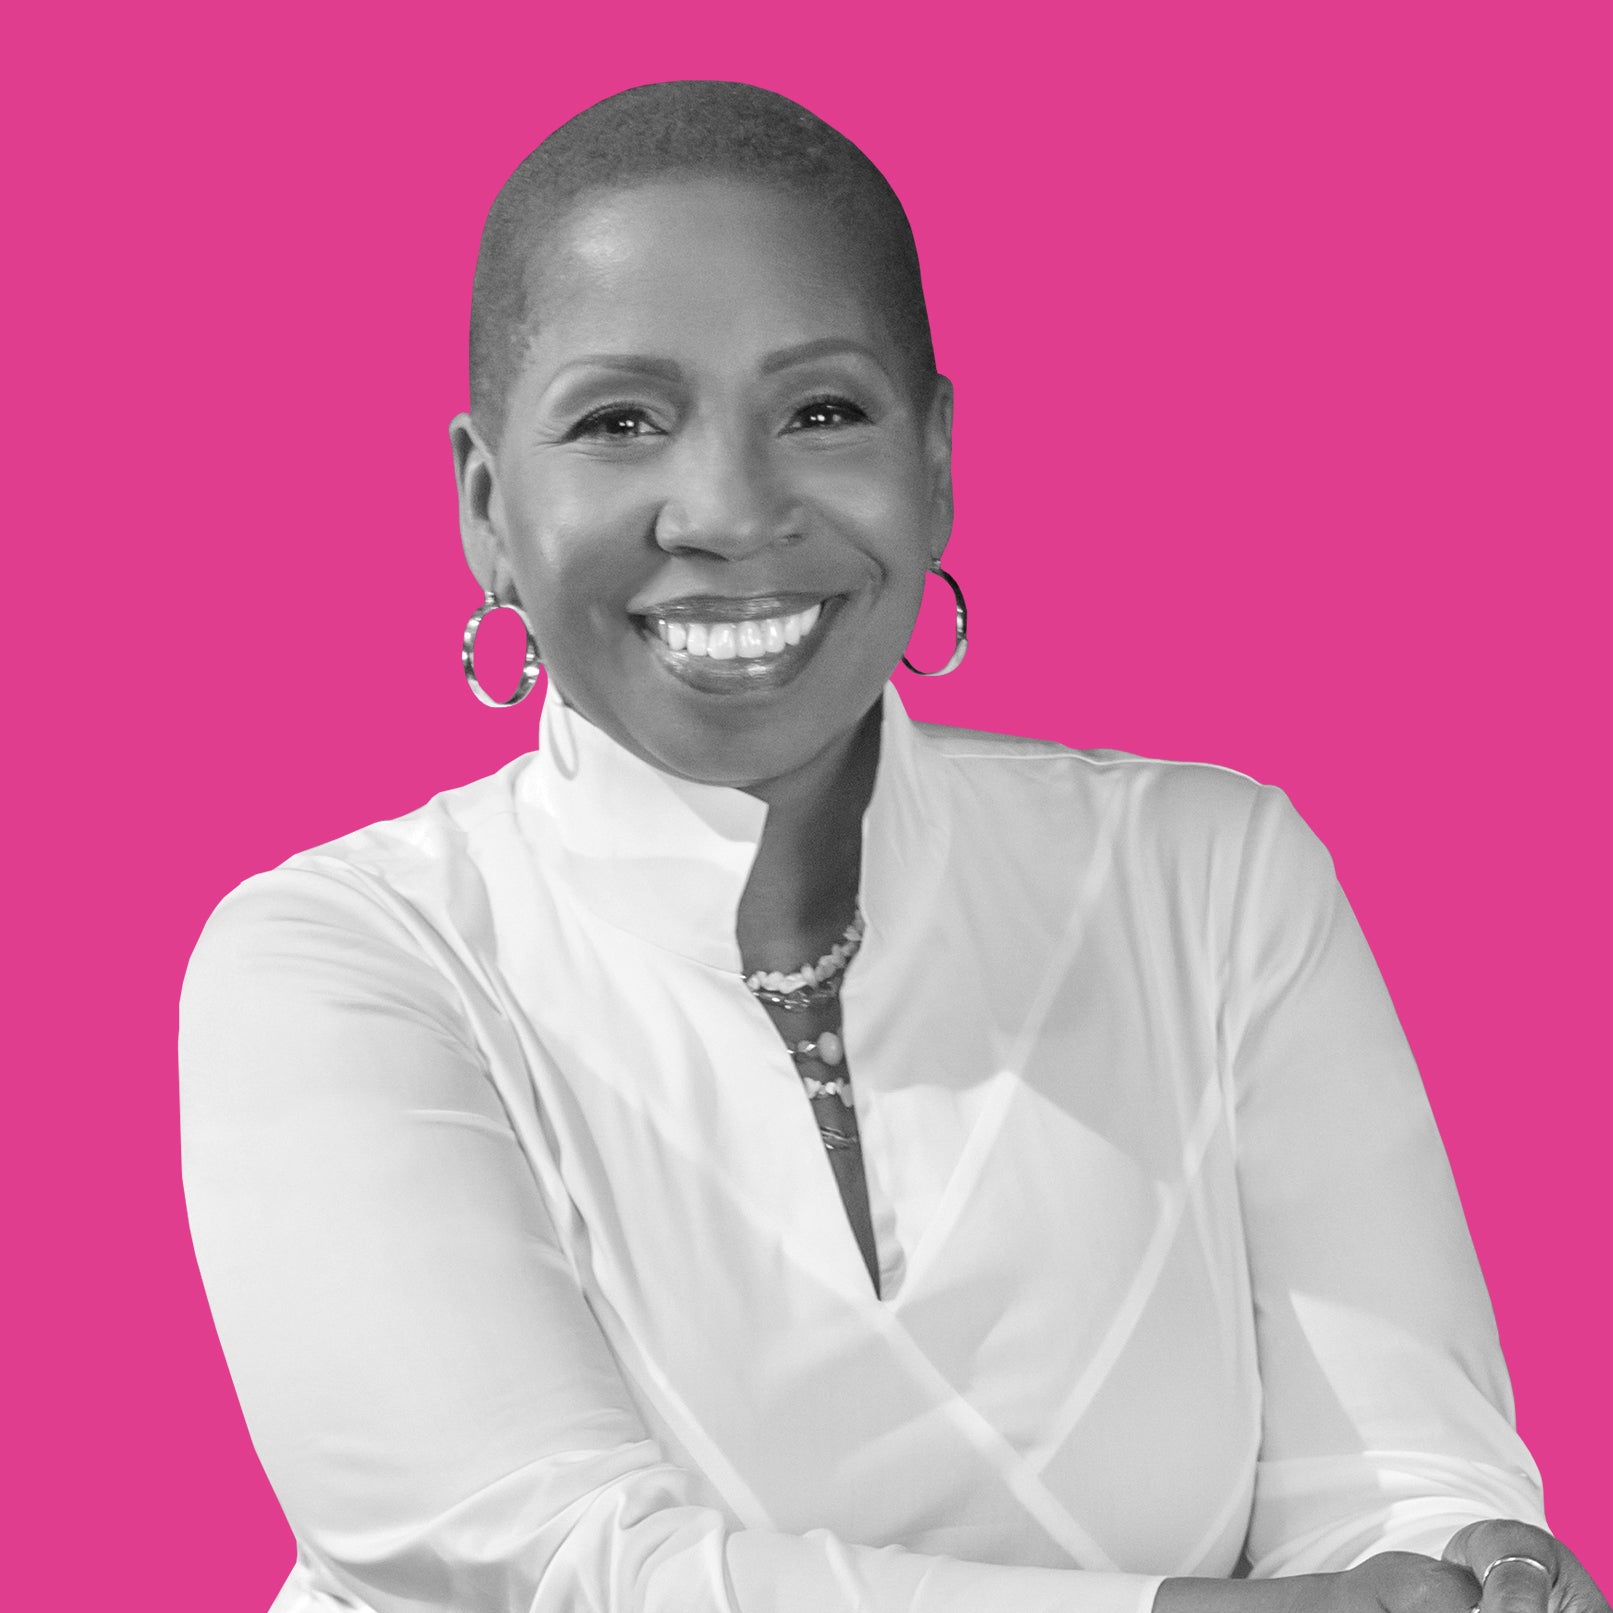 ESSENCE Fest Empowerment Stages To Feature Iyanla Vanzant, Congresswoman Maxine Waters, Ava DuVernay, Dr. Cissy Houston & More!
